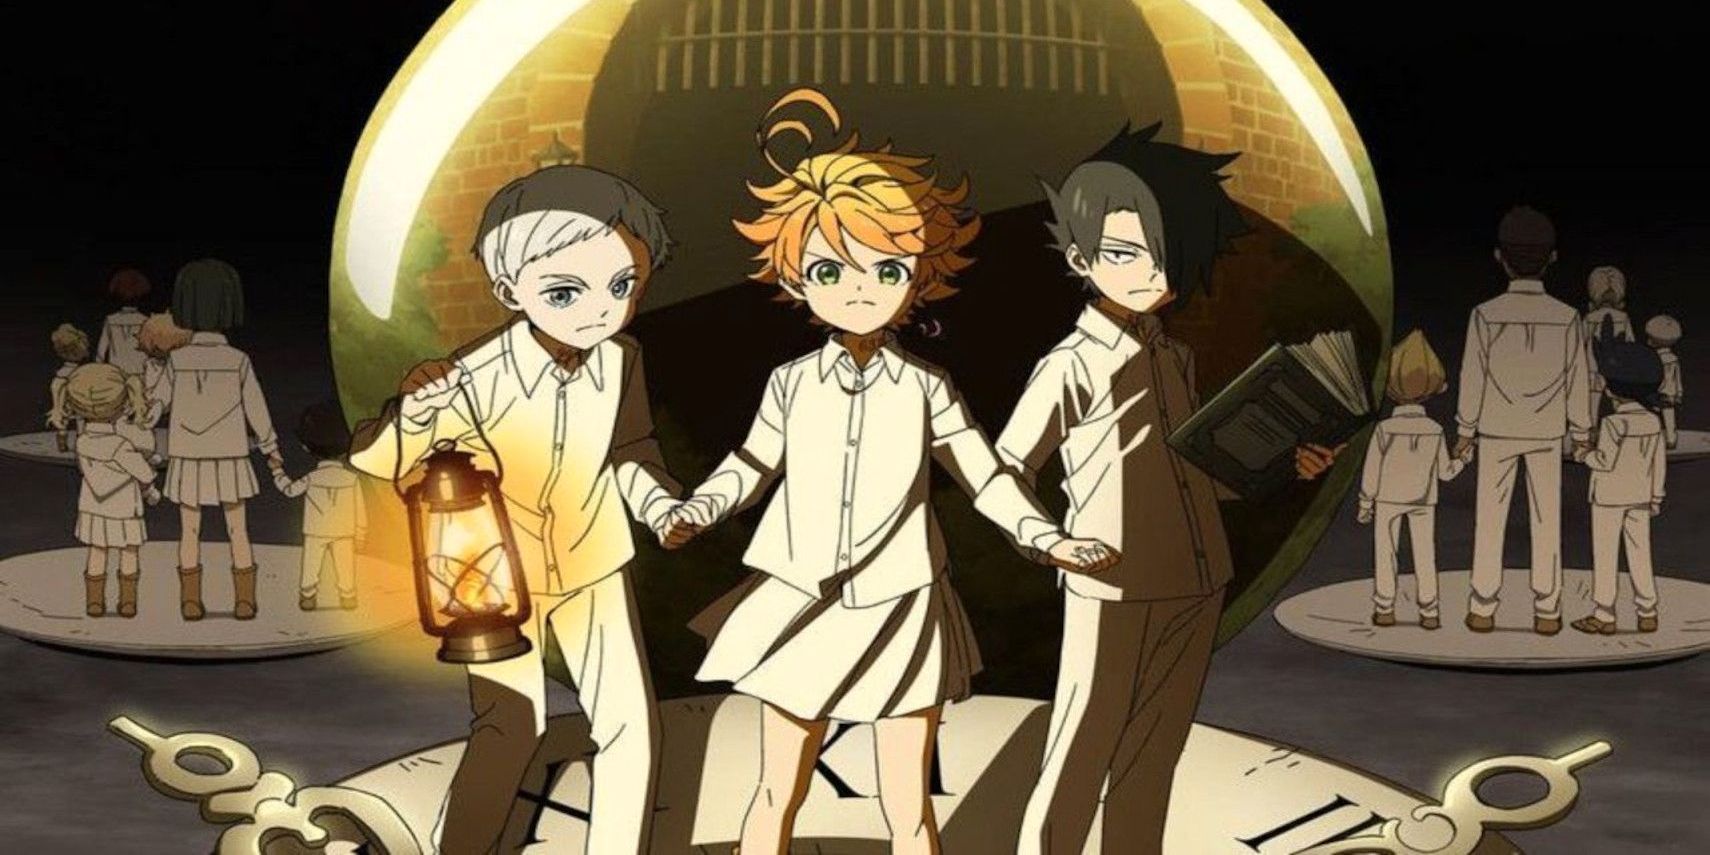 Emma, Norman, and Ray standing on a clock face (The Promised Neverland)